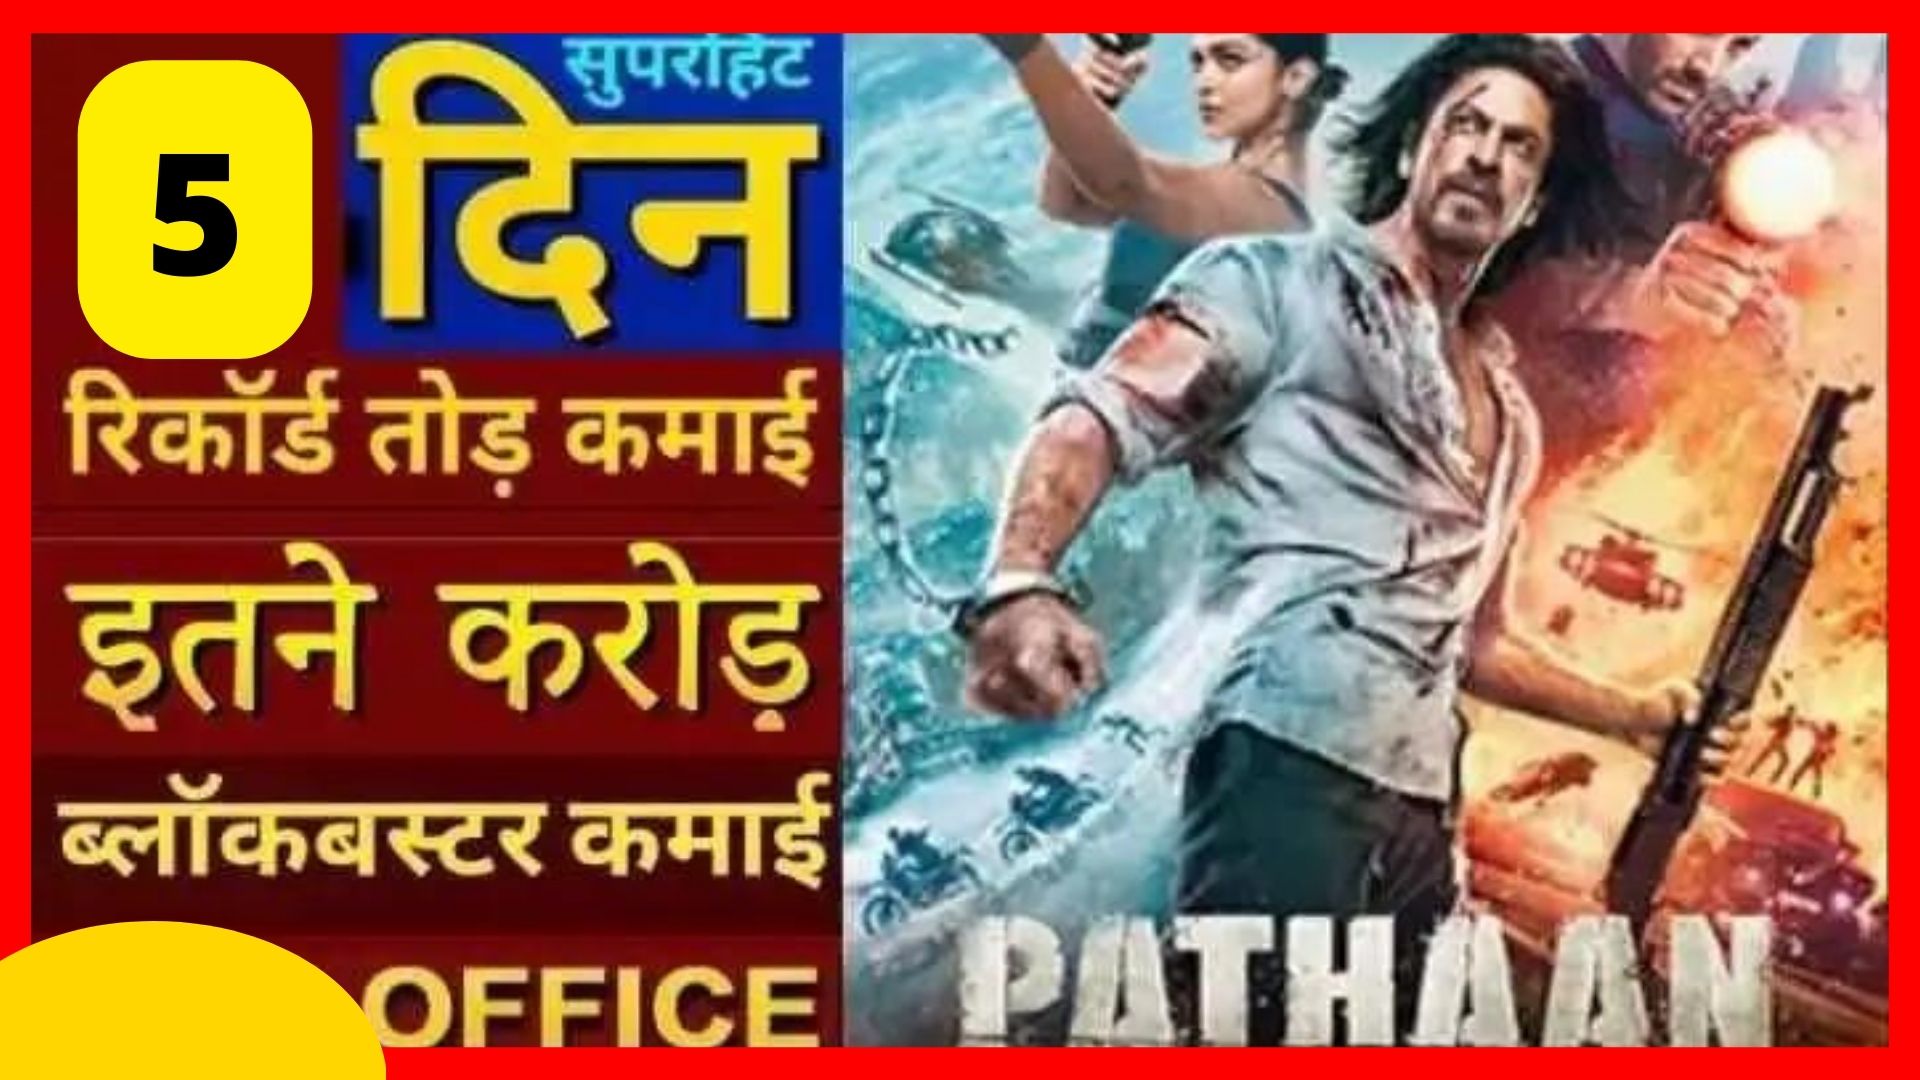 Pathan box office collection day 5